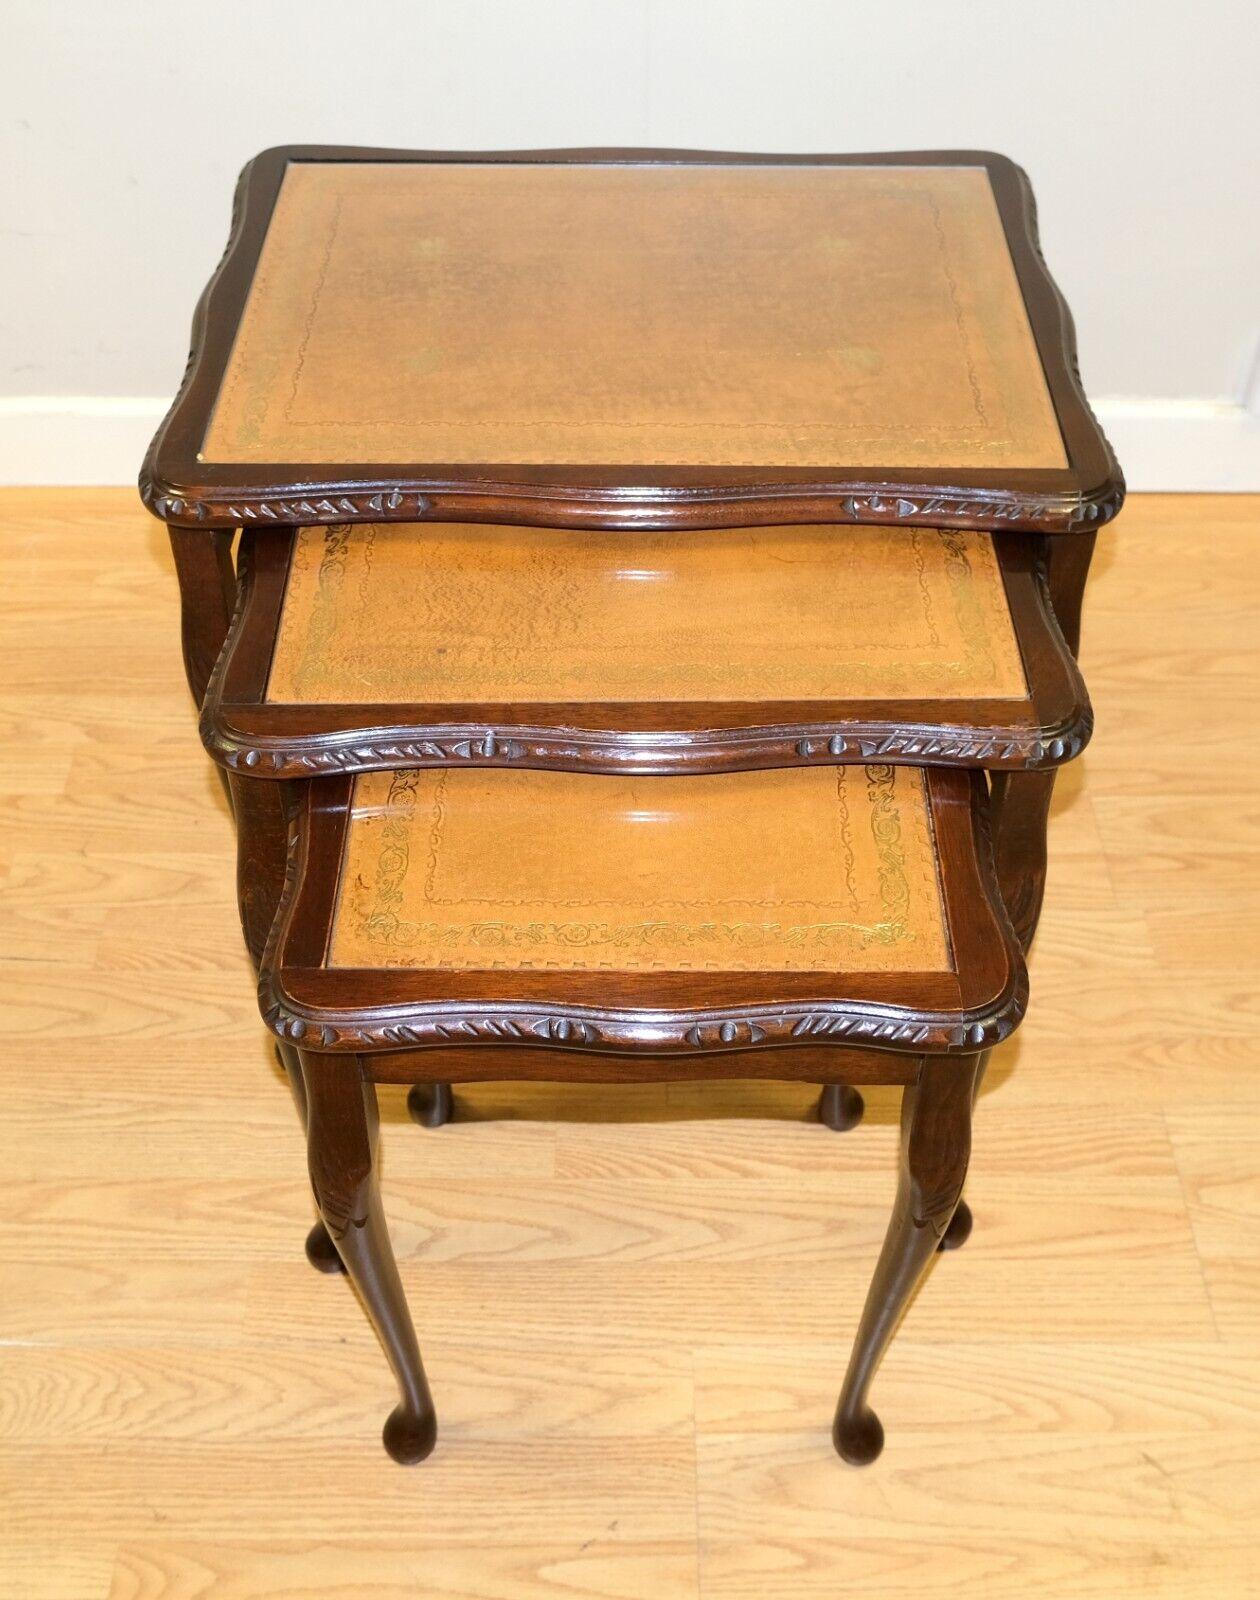 Lovely Bevan Funnell Hardwood Nest of Tables with Brown Leather & Glass Tops 6